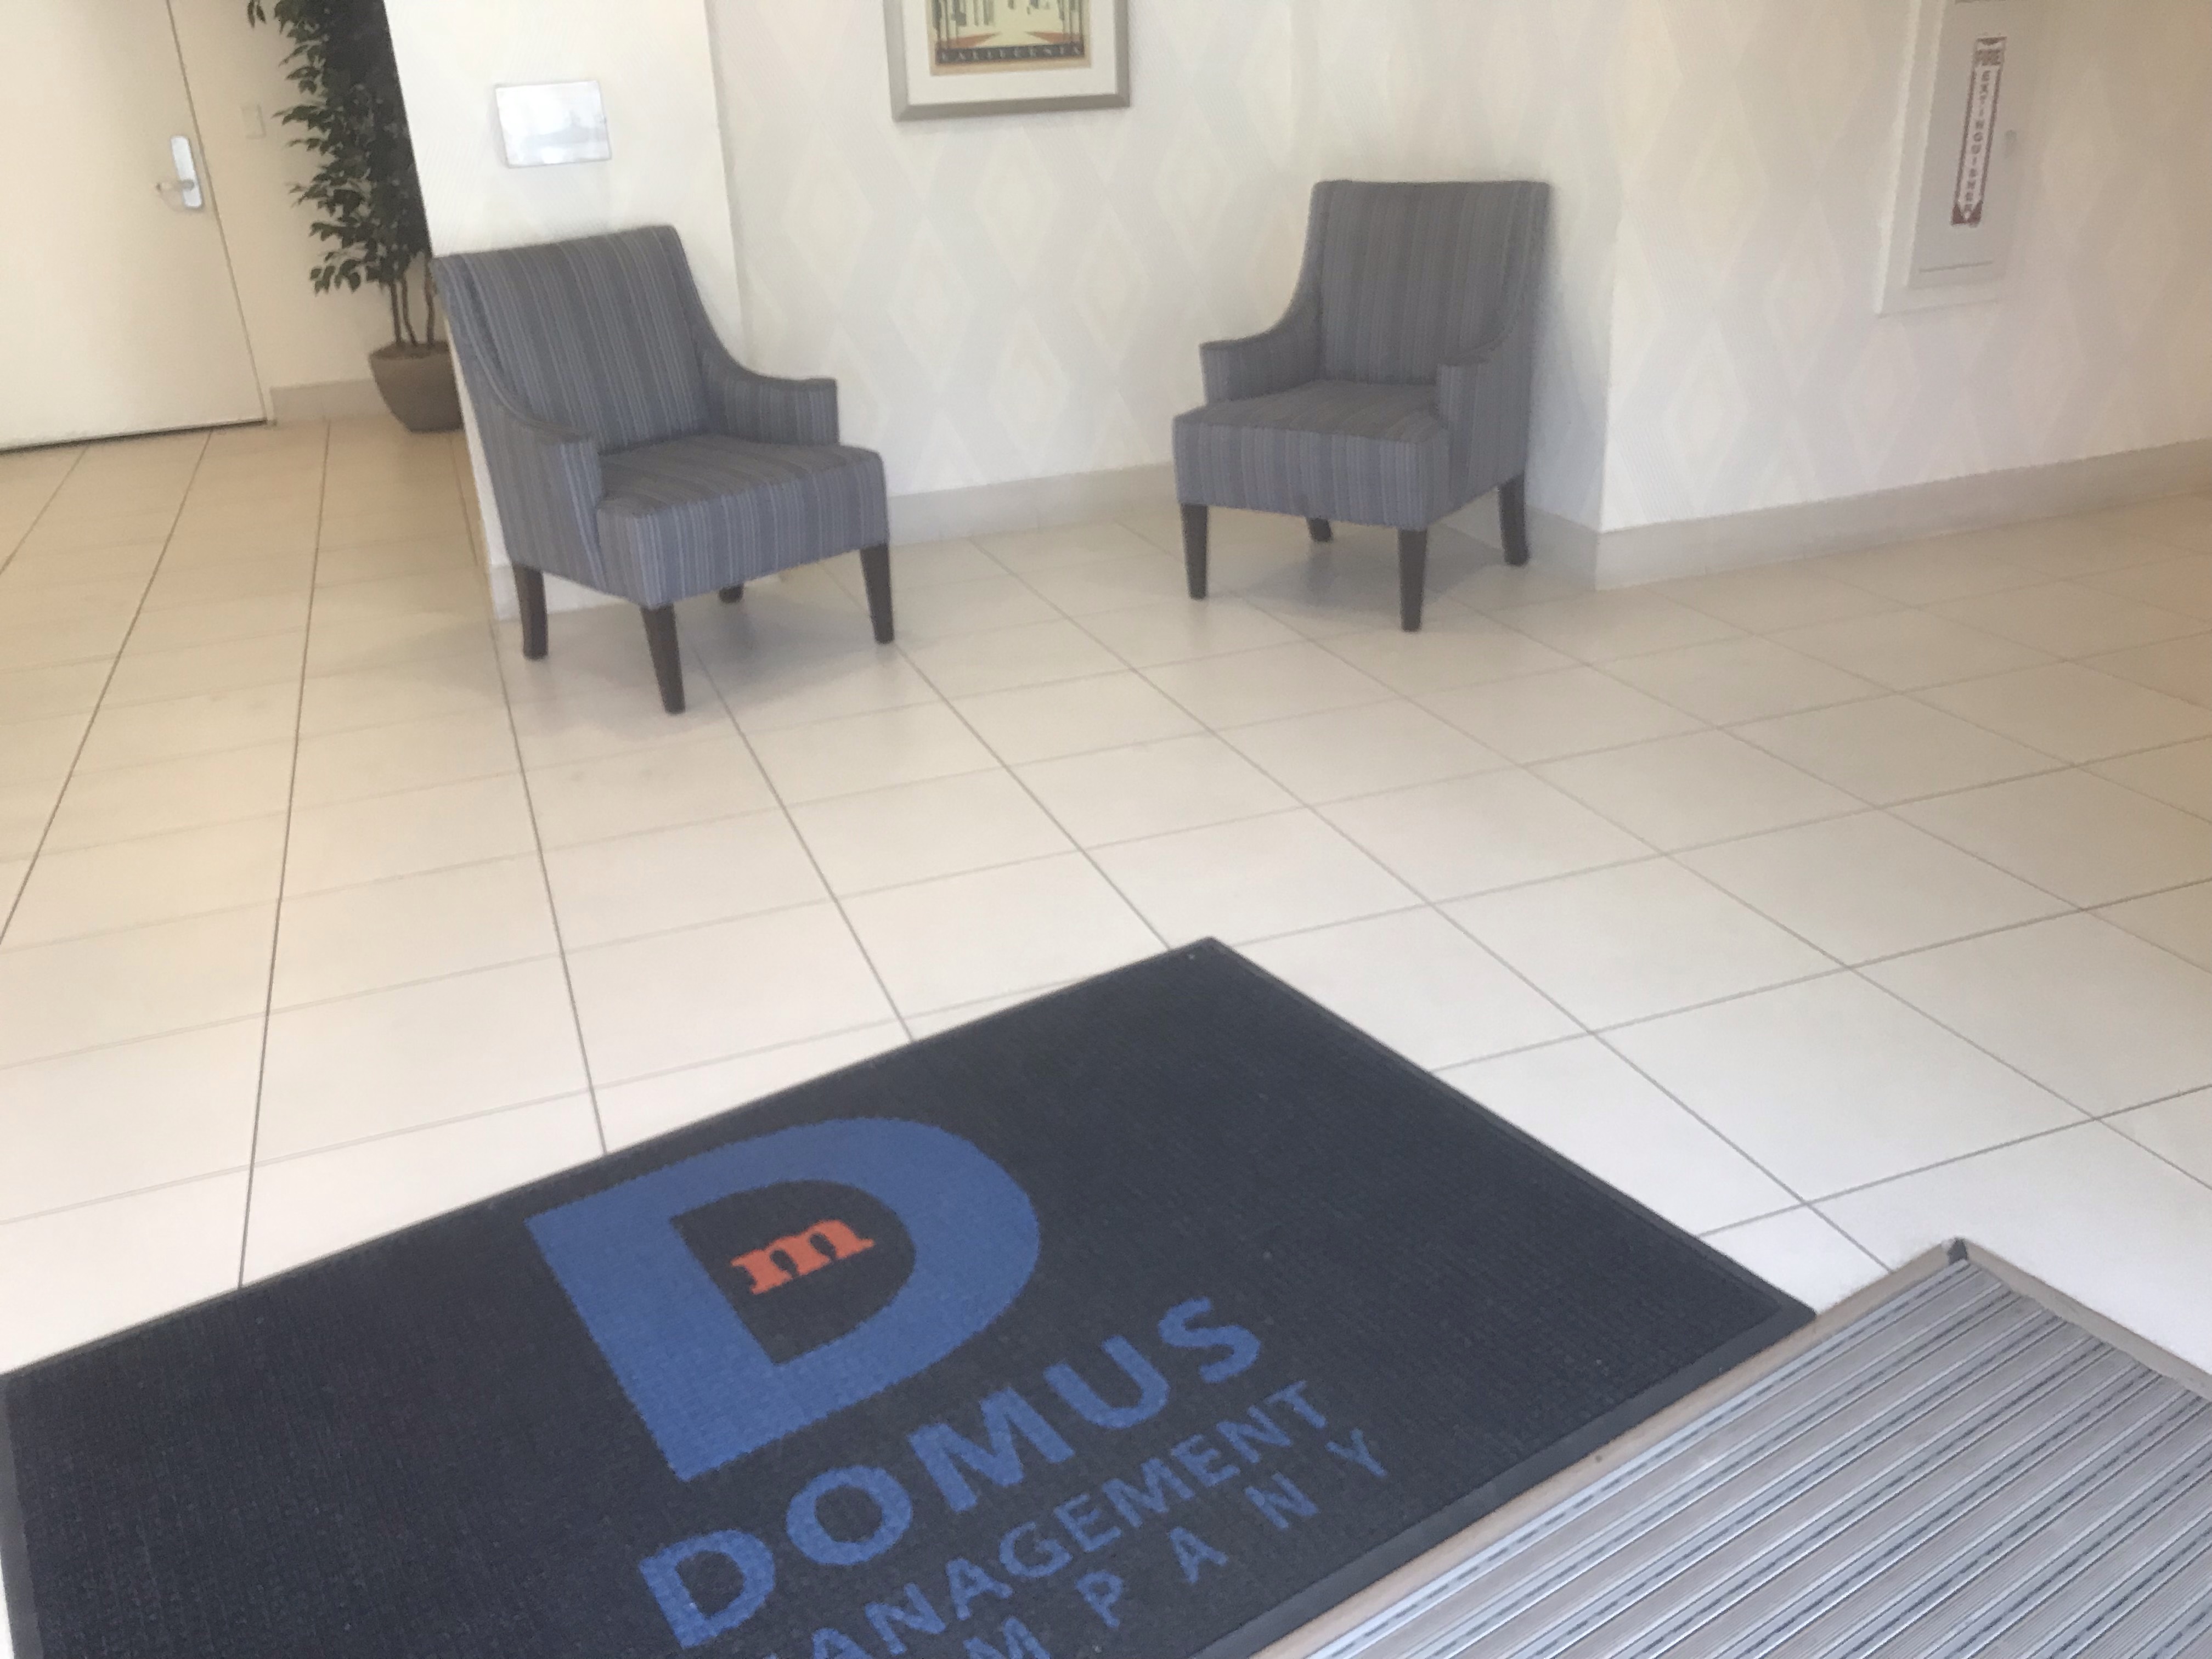 View of a common area, beige tile, two area rugs, one rug with Domus management name on it, two gray upholstered arm chairs, a door, a plant near the door, a fire extinguisher.